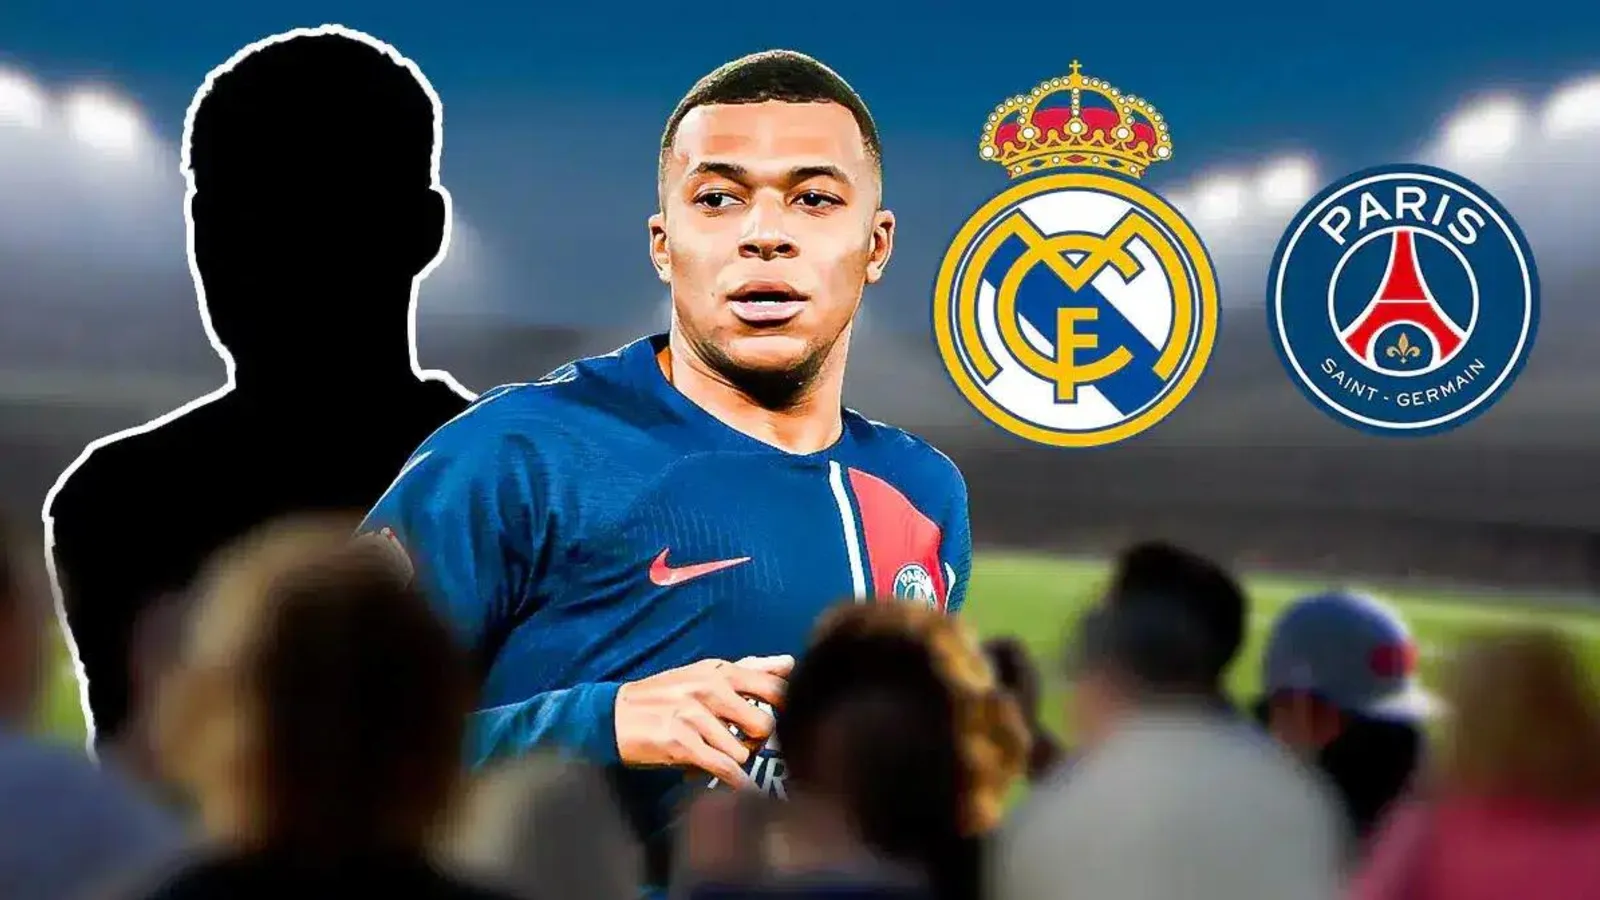 Rumor: Kylian Mbappe to bring another PSG player to Real Madrid with him